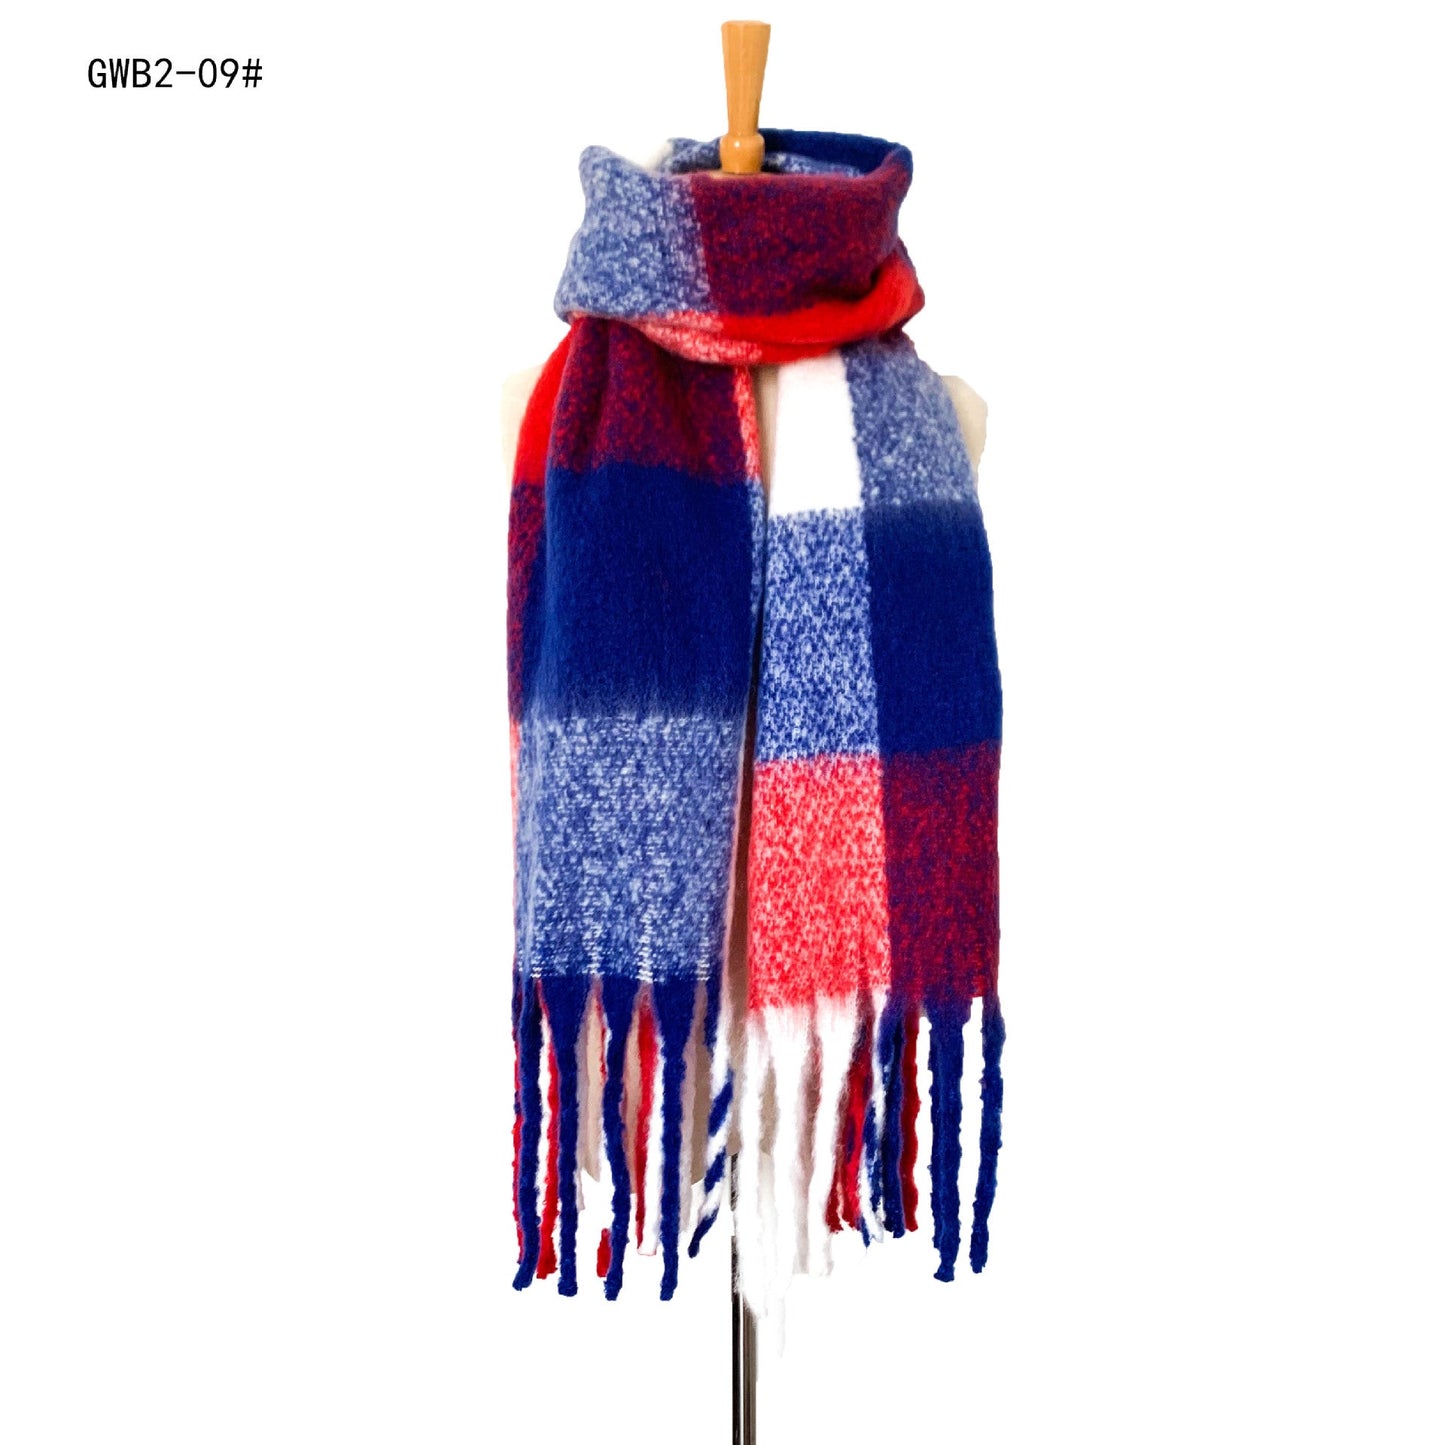 Casual Warm Thick Winter Scarves-Scarves & Shawls-GWB2-09-190-200cm-Free Shipping Leatheretro